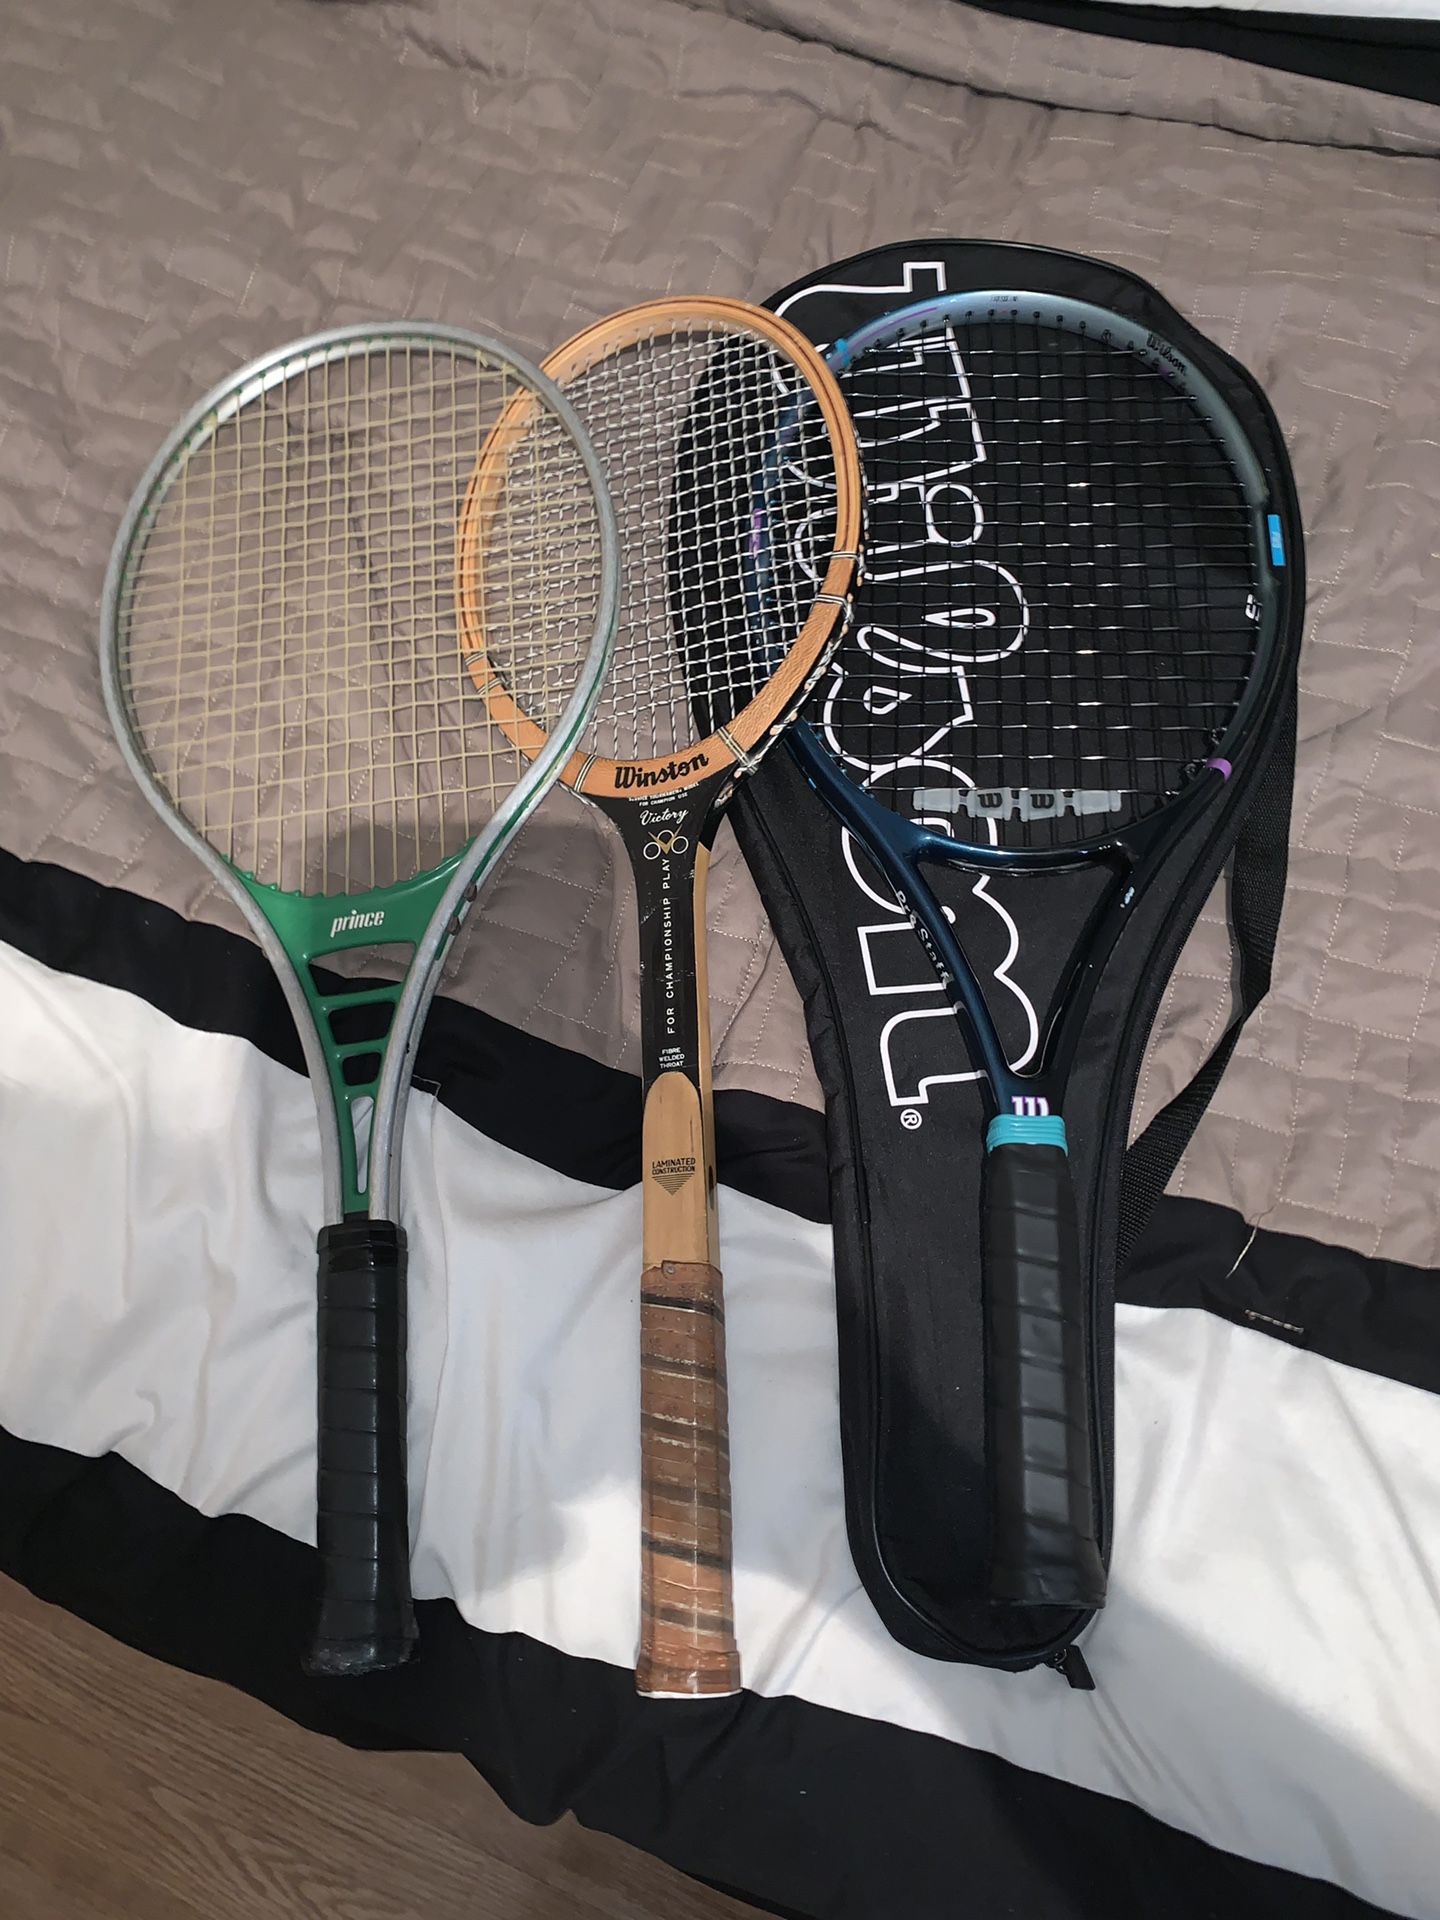 Tennis Rackets Vintage And Also Used Tennis Rackets Bundle And will sell individual